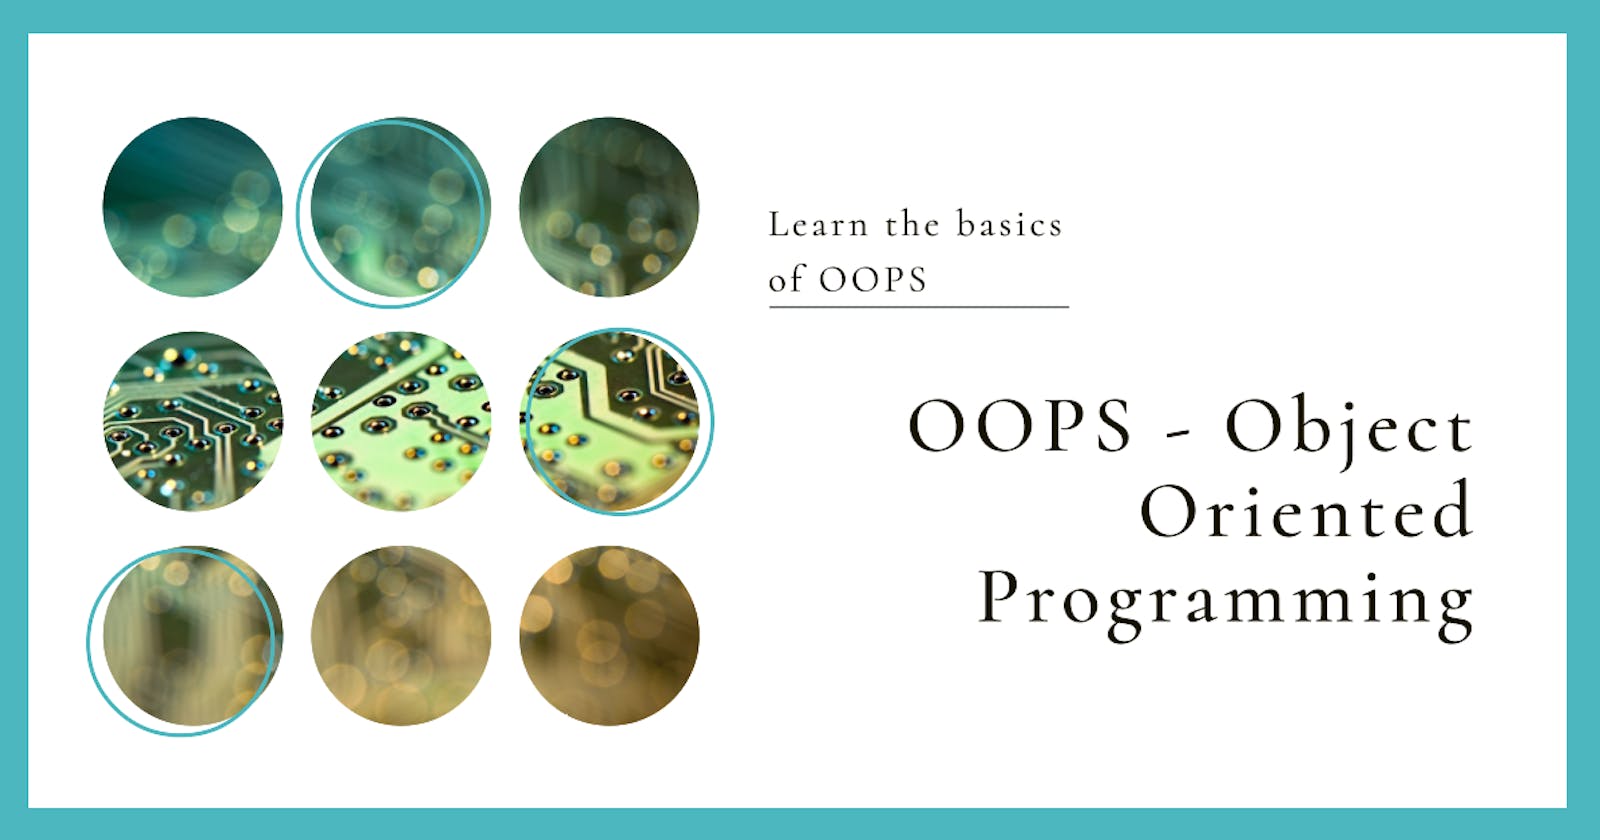 An introduction and basics on OOPS